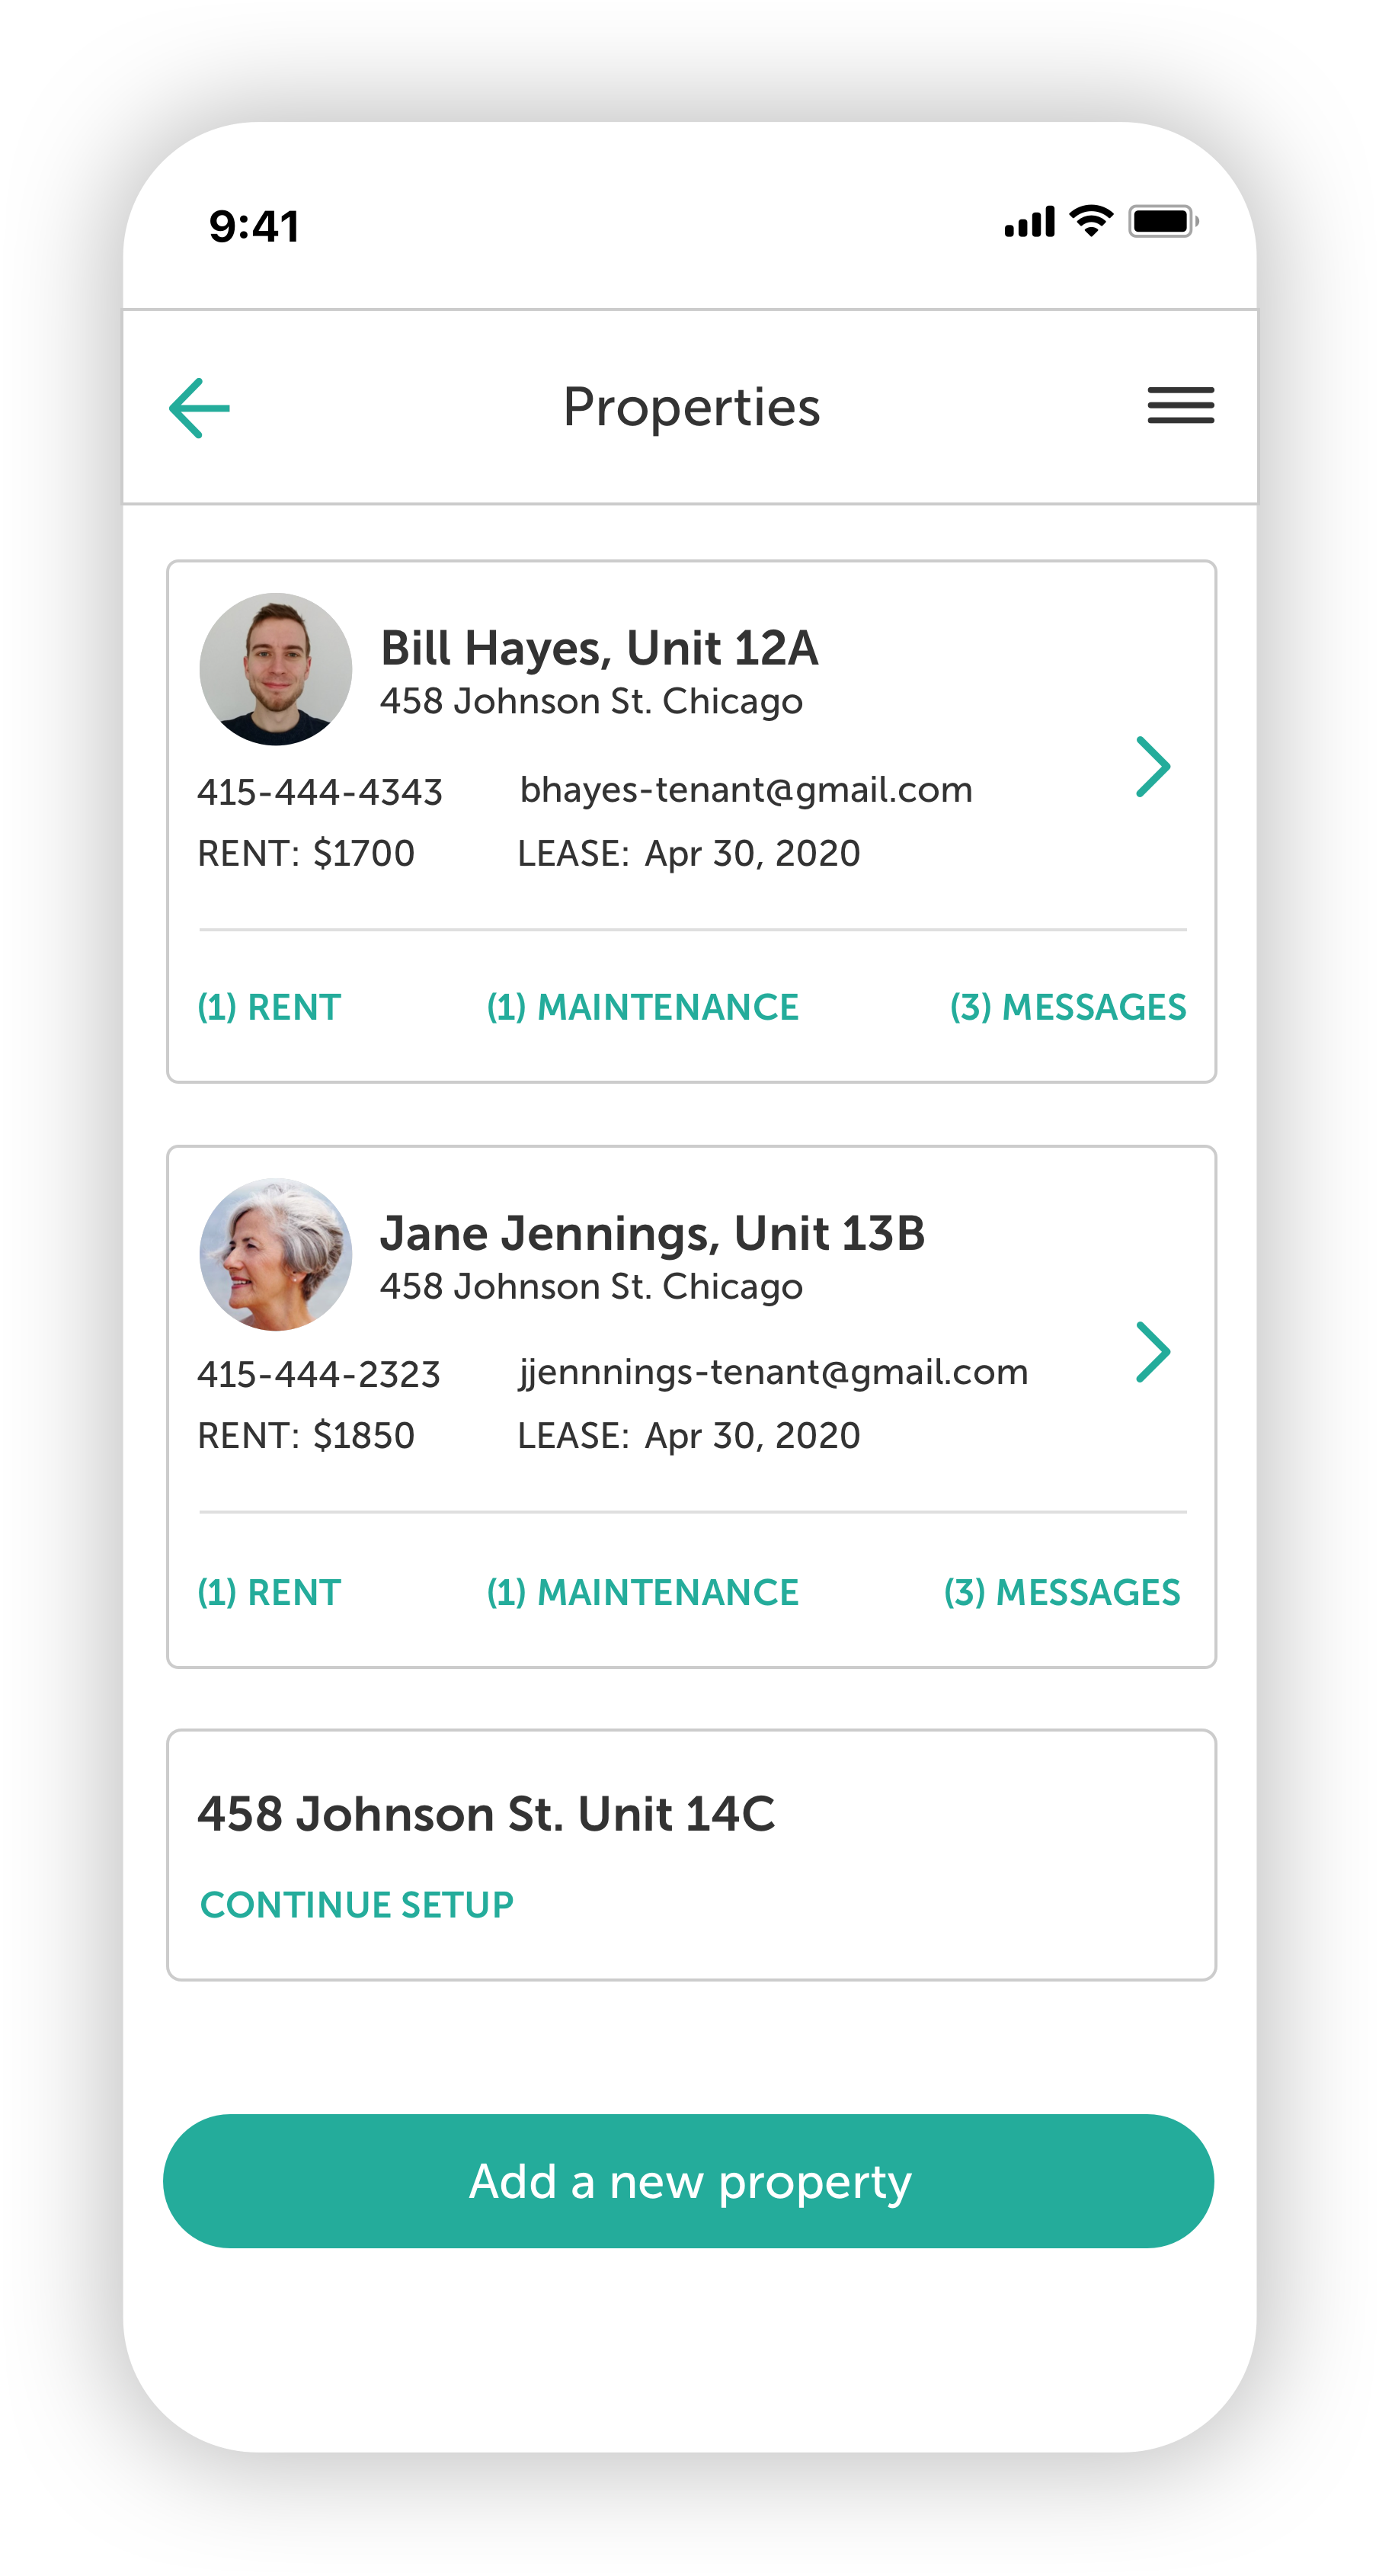 Properties dashboard for all of your rental properties